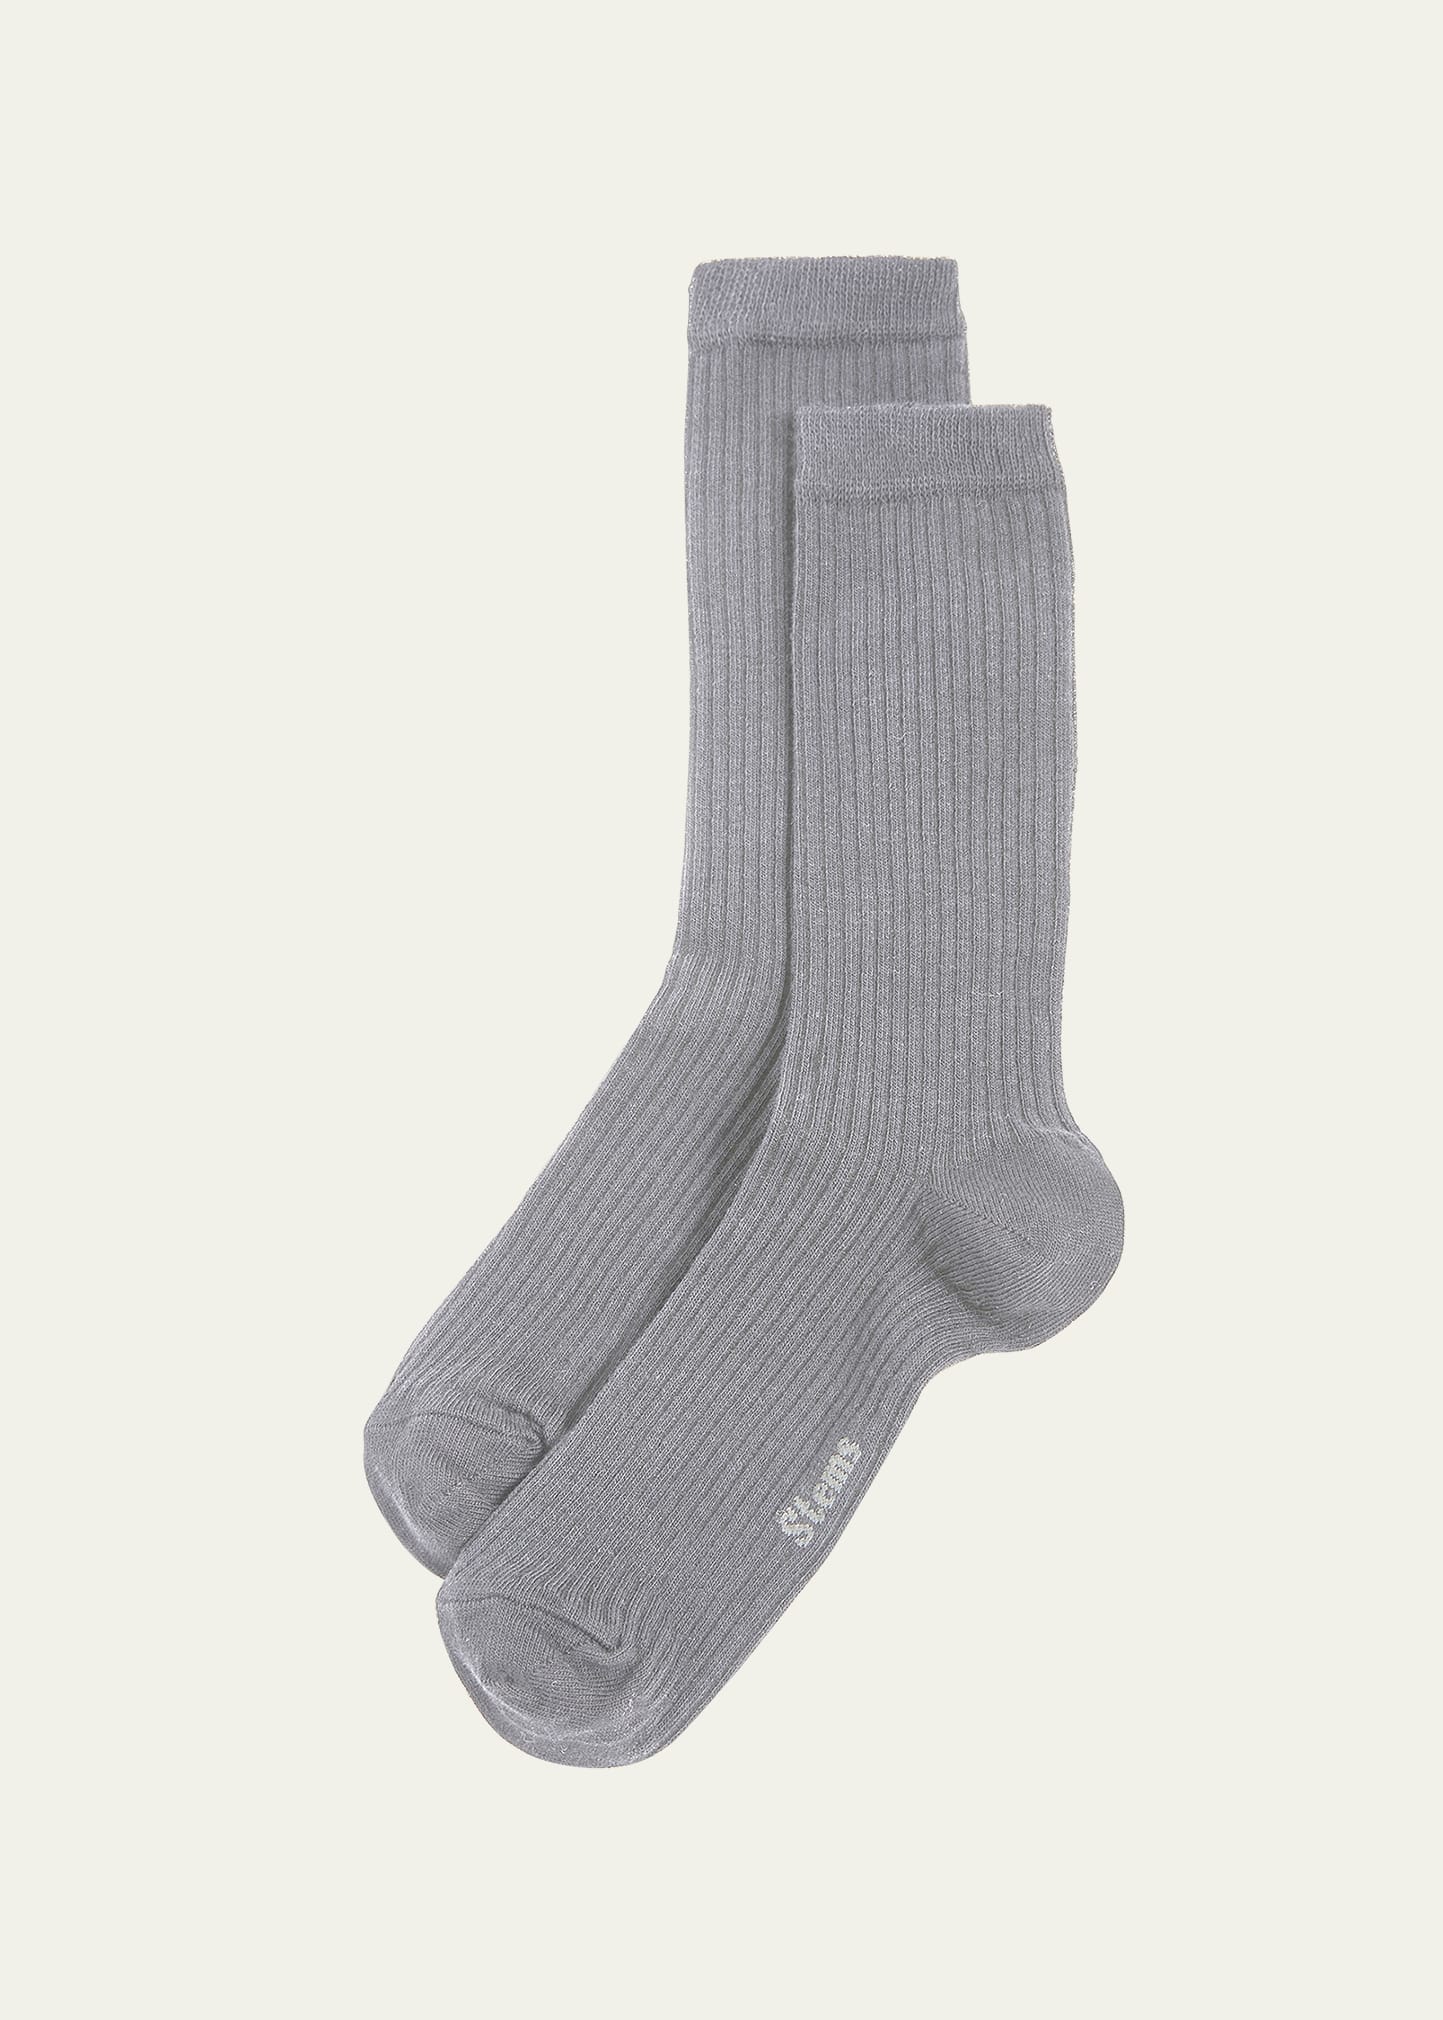 Stems Lola Cashmere Ribbed Crew Socks in Pink